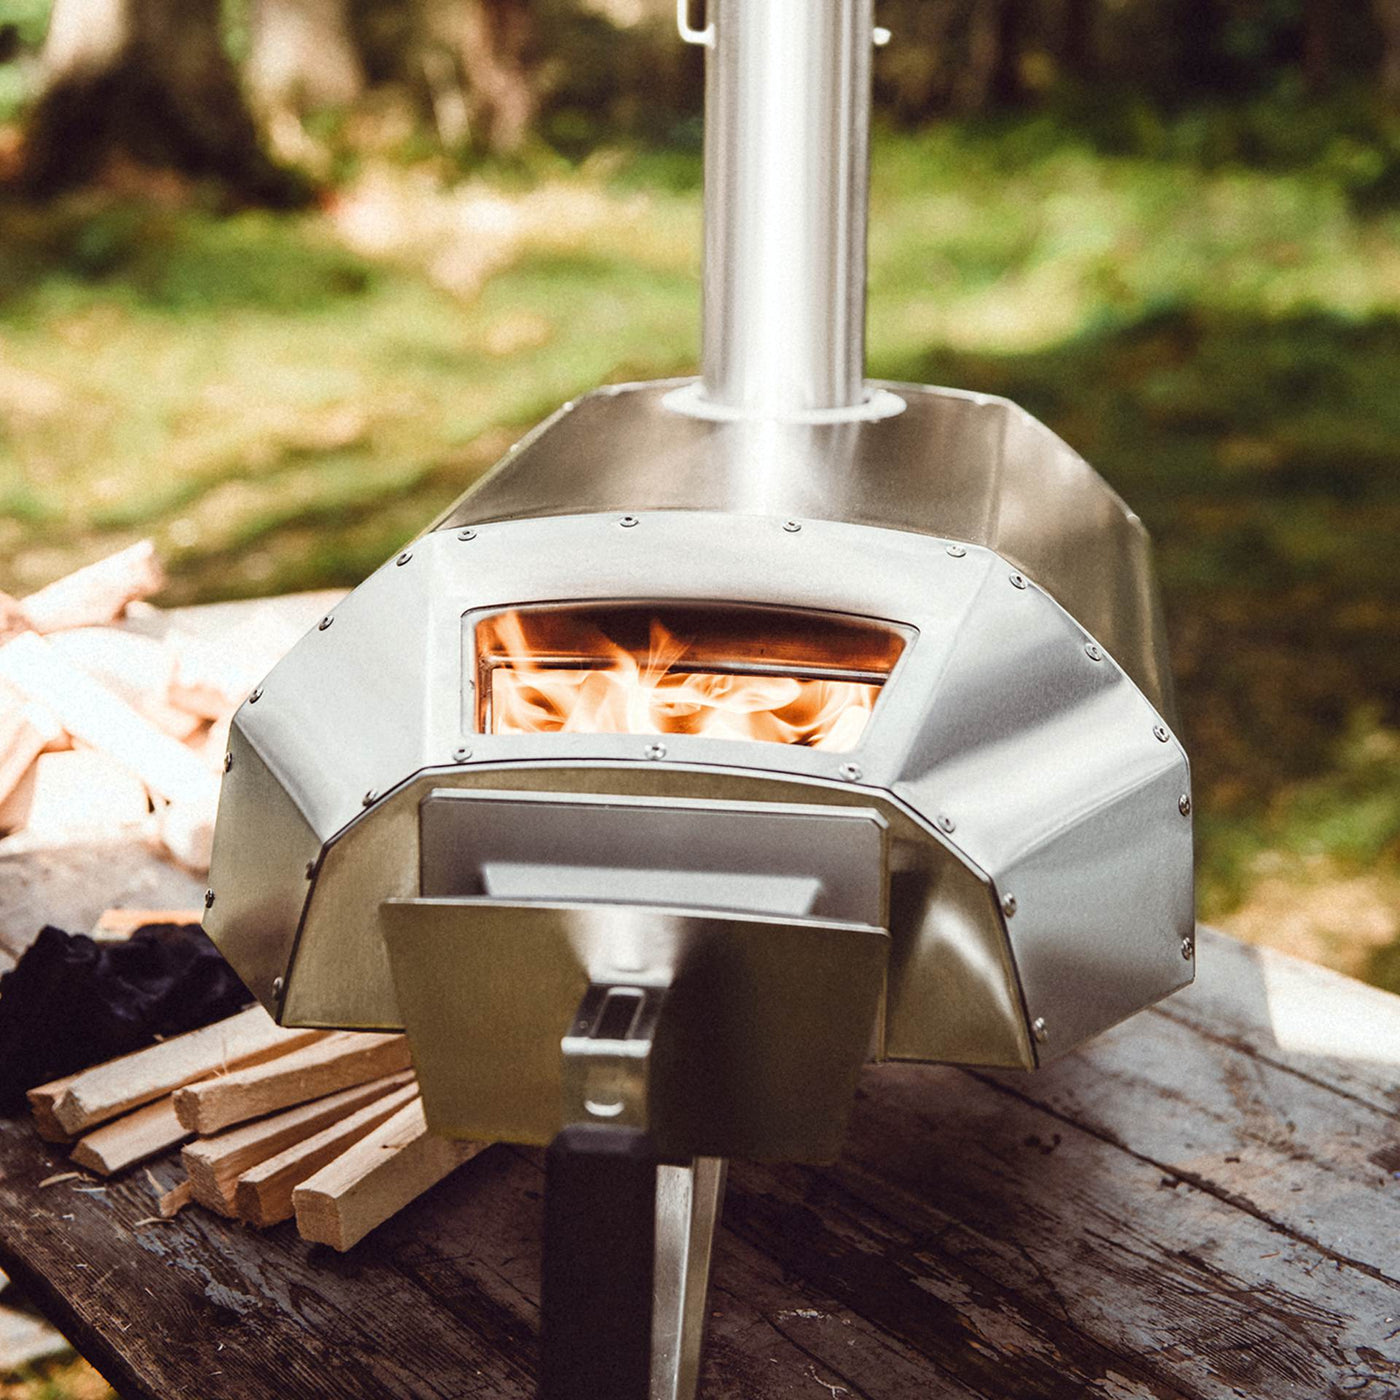 Ooni Karu 12 Multi-Fuel Outdoor Pizza Oven – Portable Wood Fired and Gas  Pizza Oven – Outdoor Cooking Pizza Maker - Pizza Oven For Authentic Stone